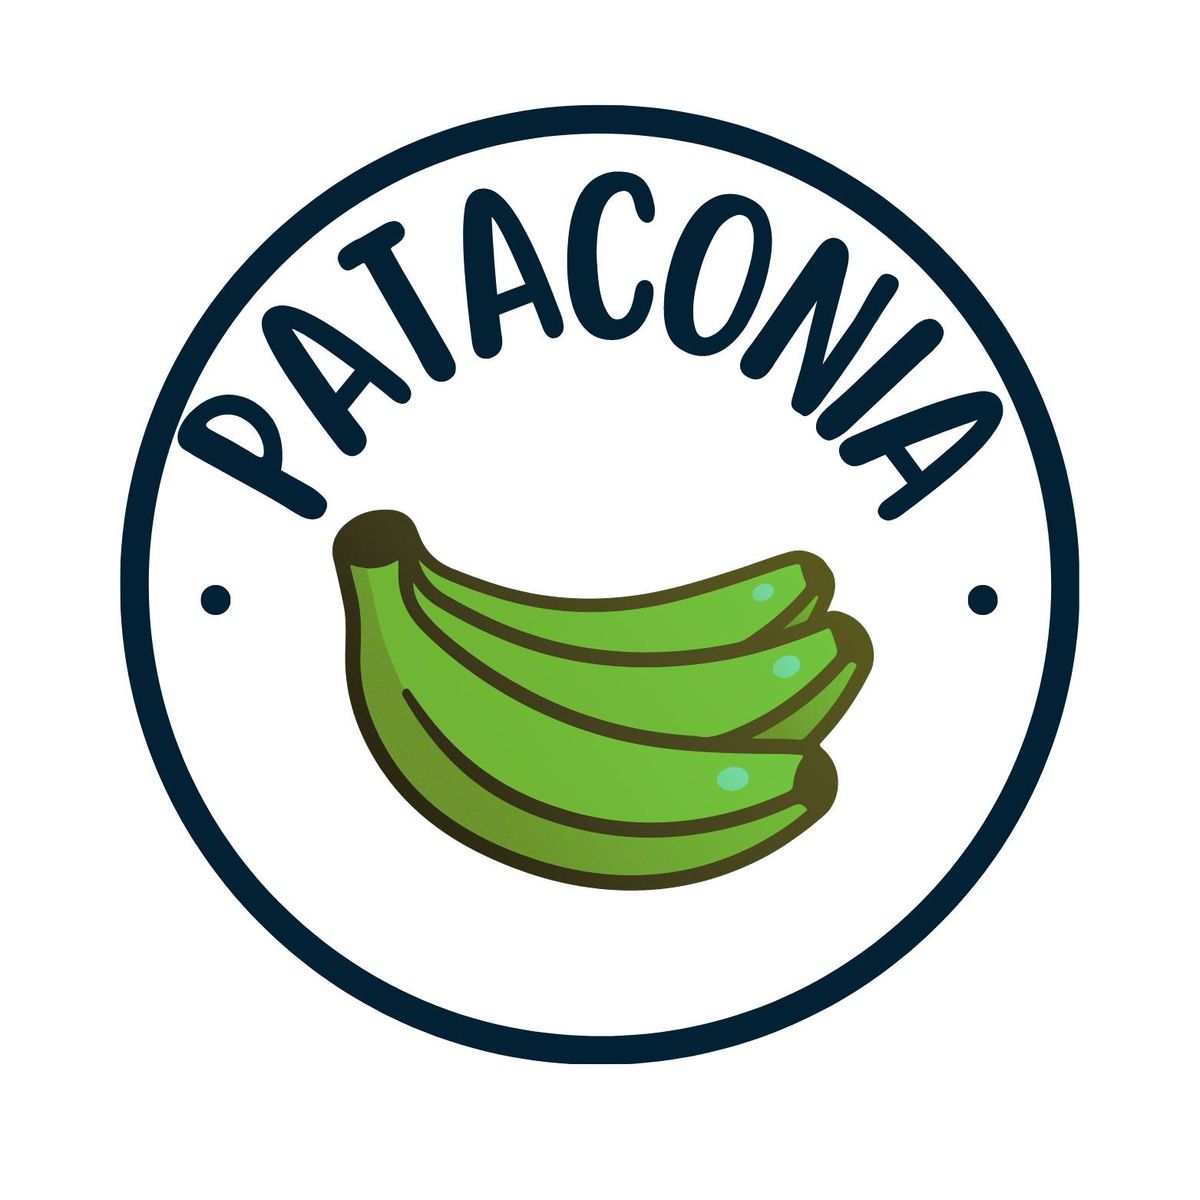 Pataconia Food Popup - Caribbean Food with a Twist!